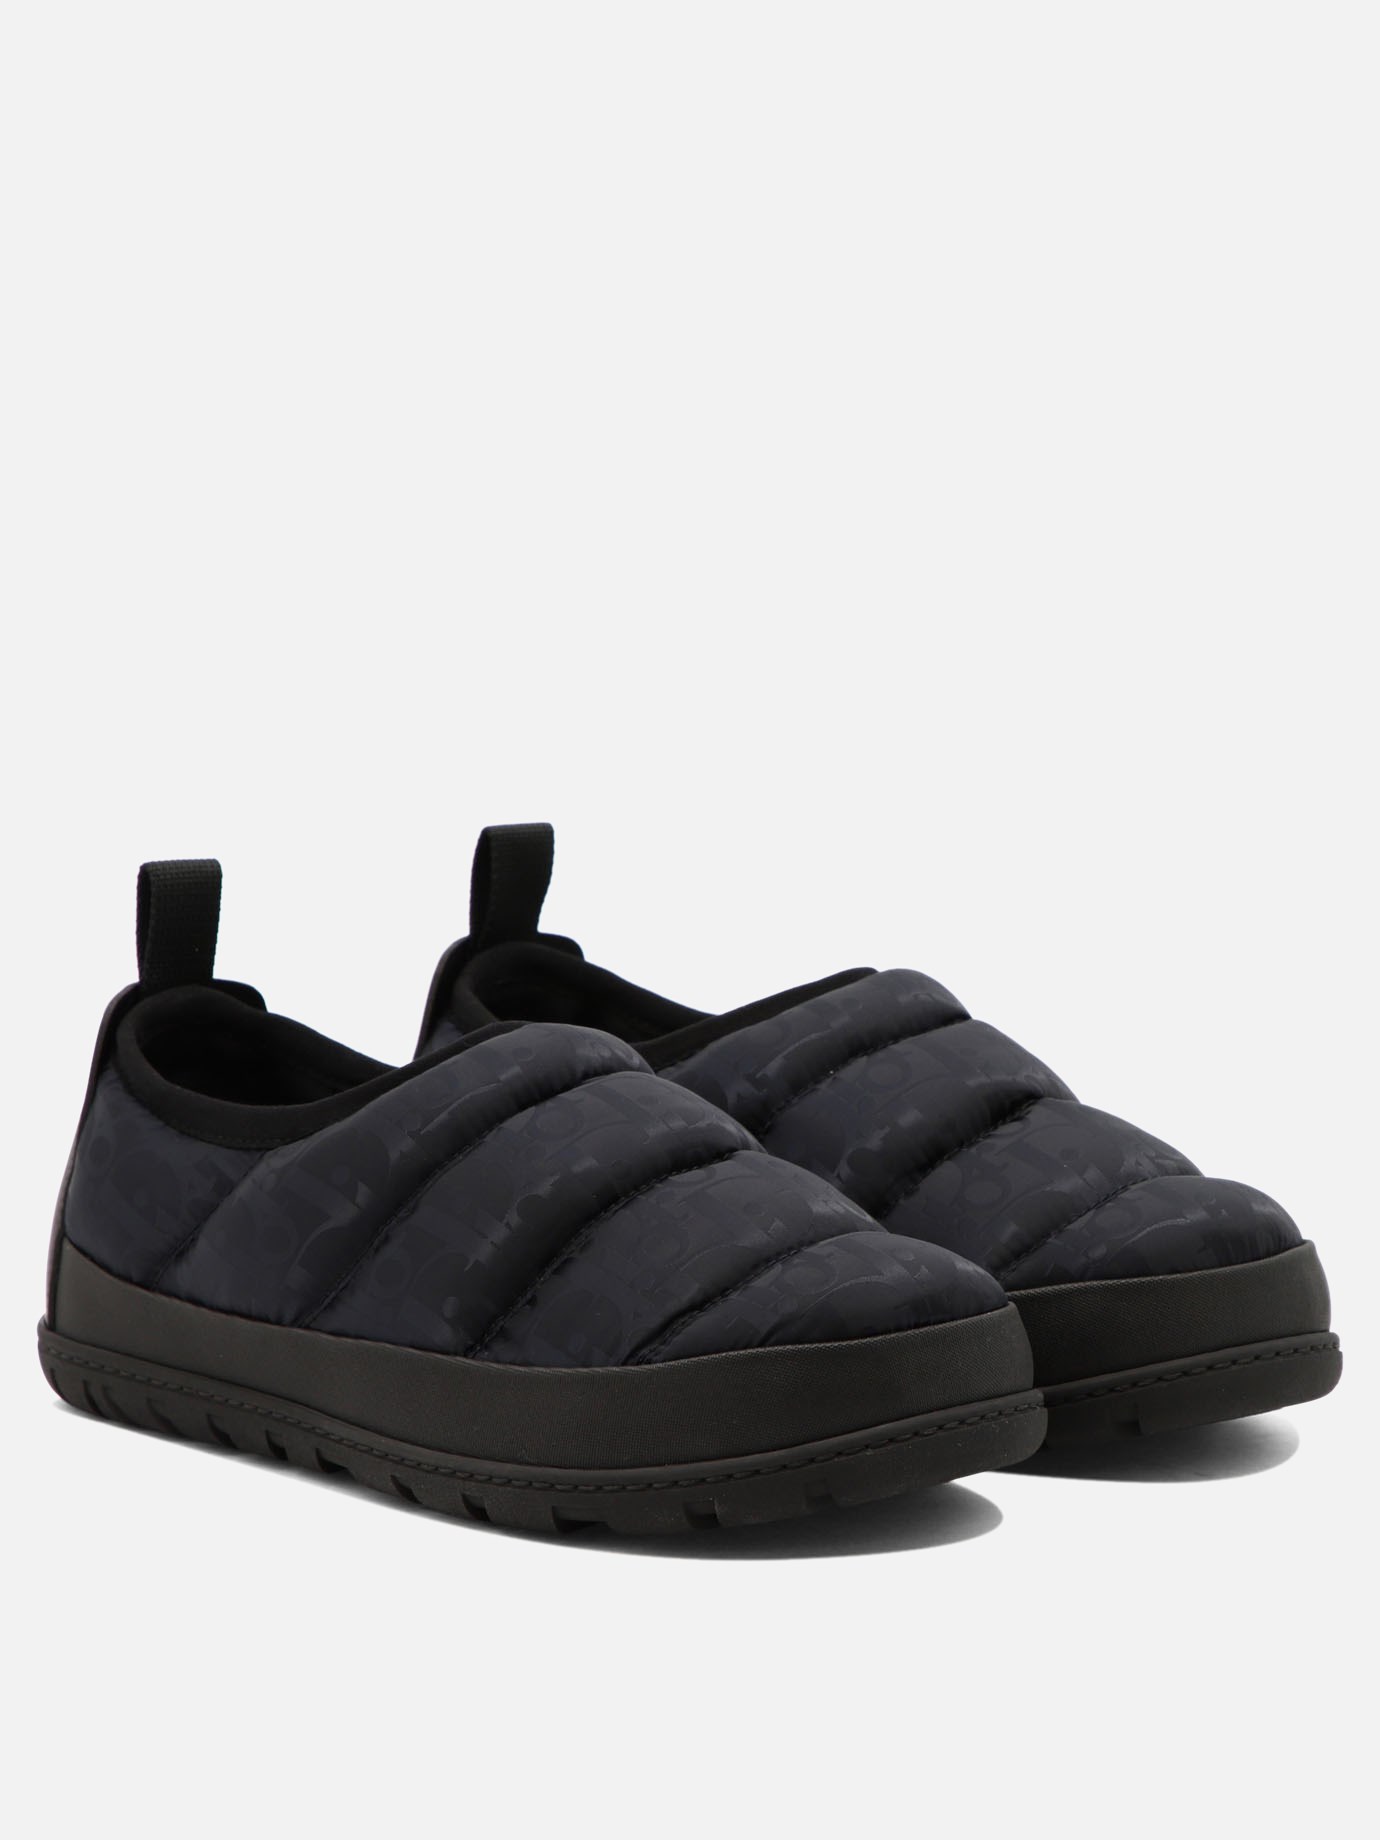  Dior Oblique  slippers by Dior